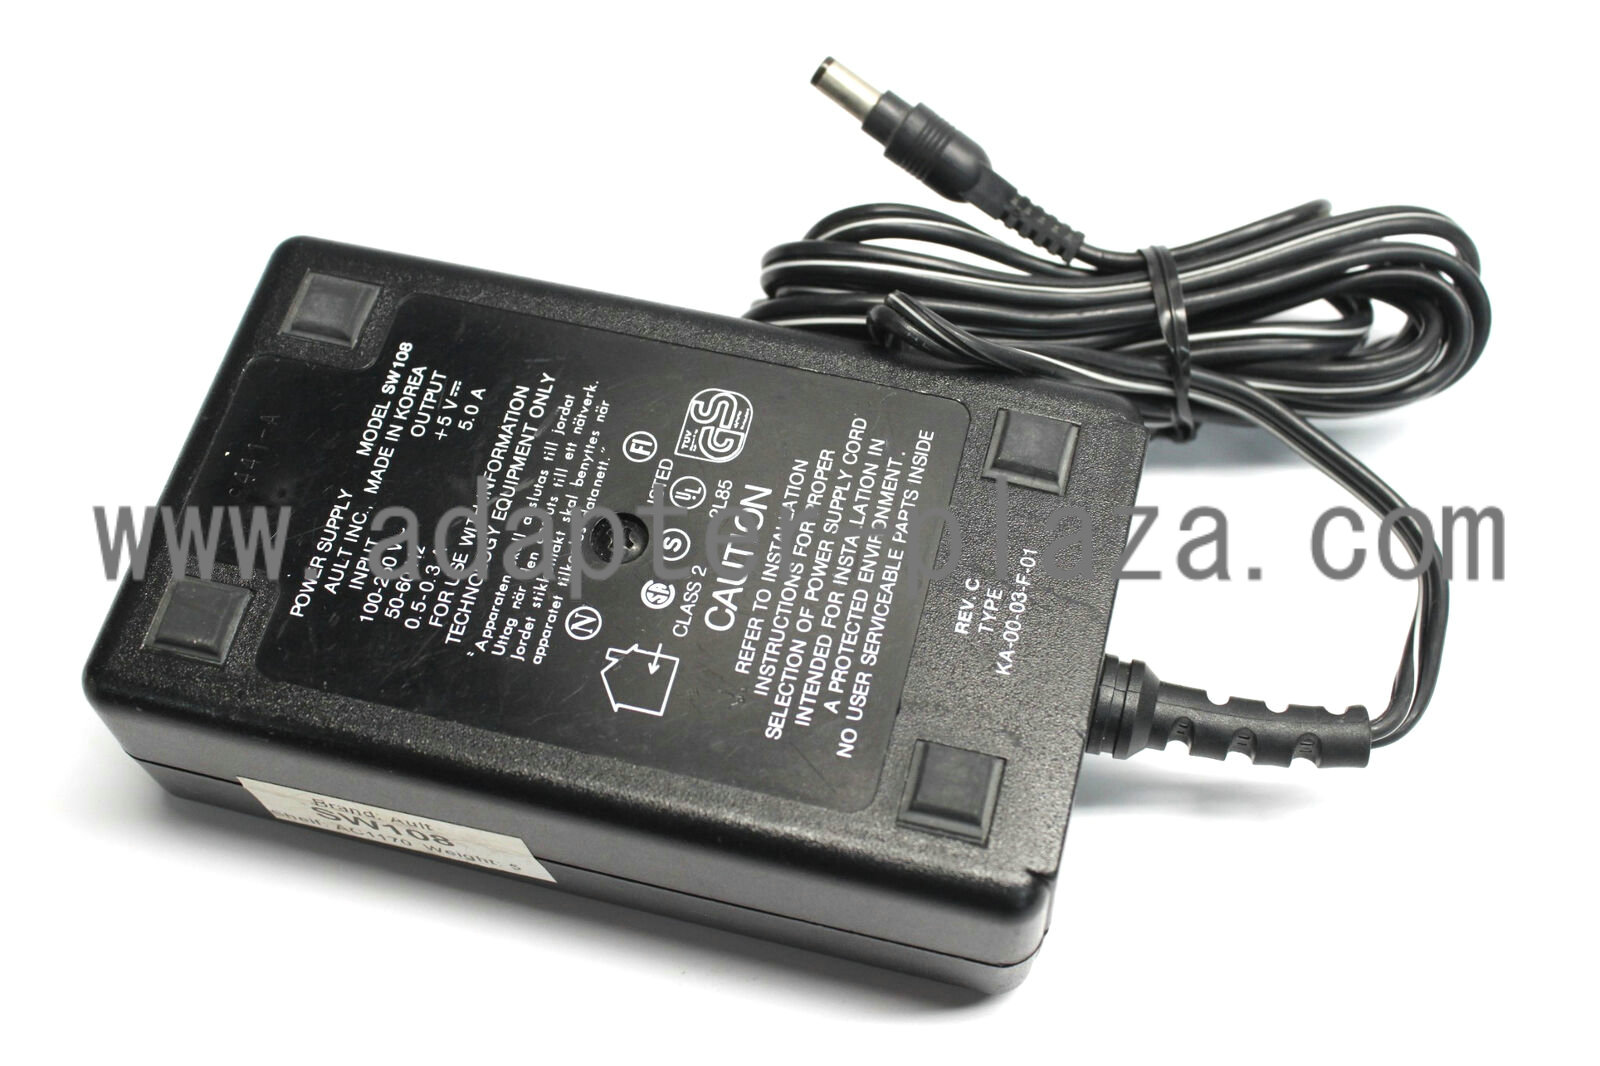 New Ault SW108 DC 5V 5.0A Class 2 Power Supply AC Adapter